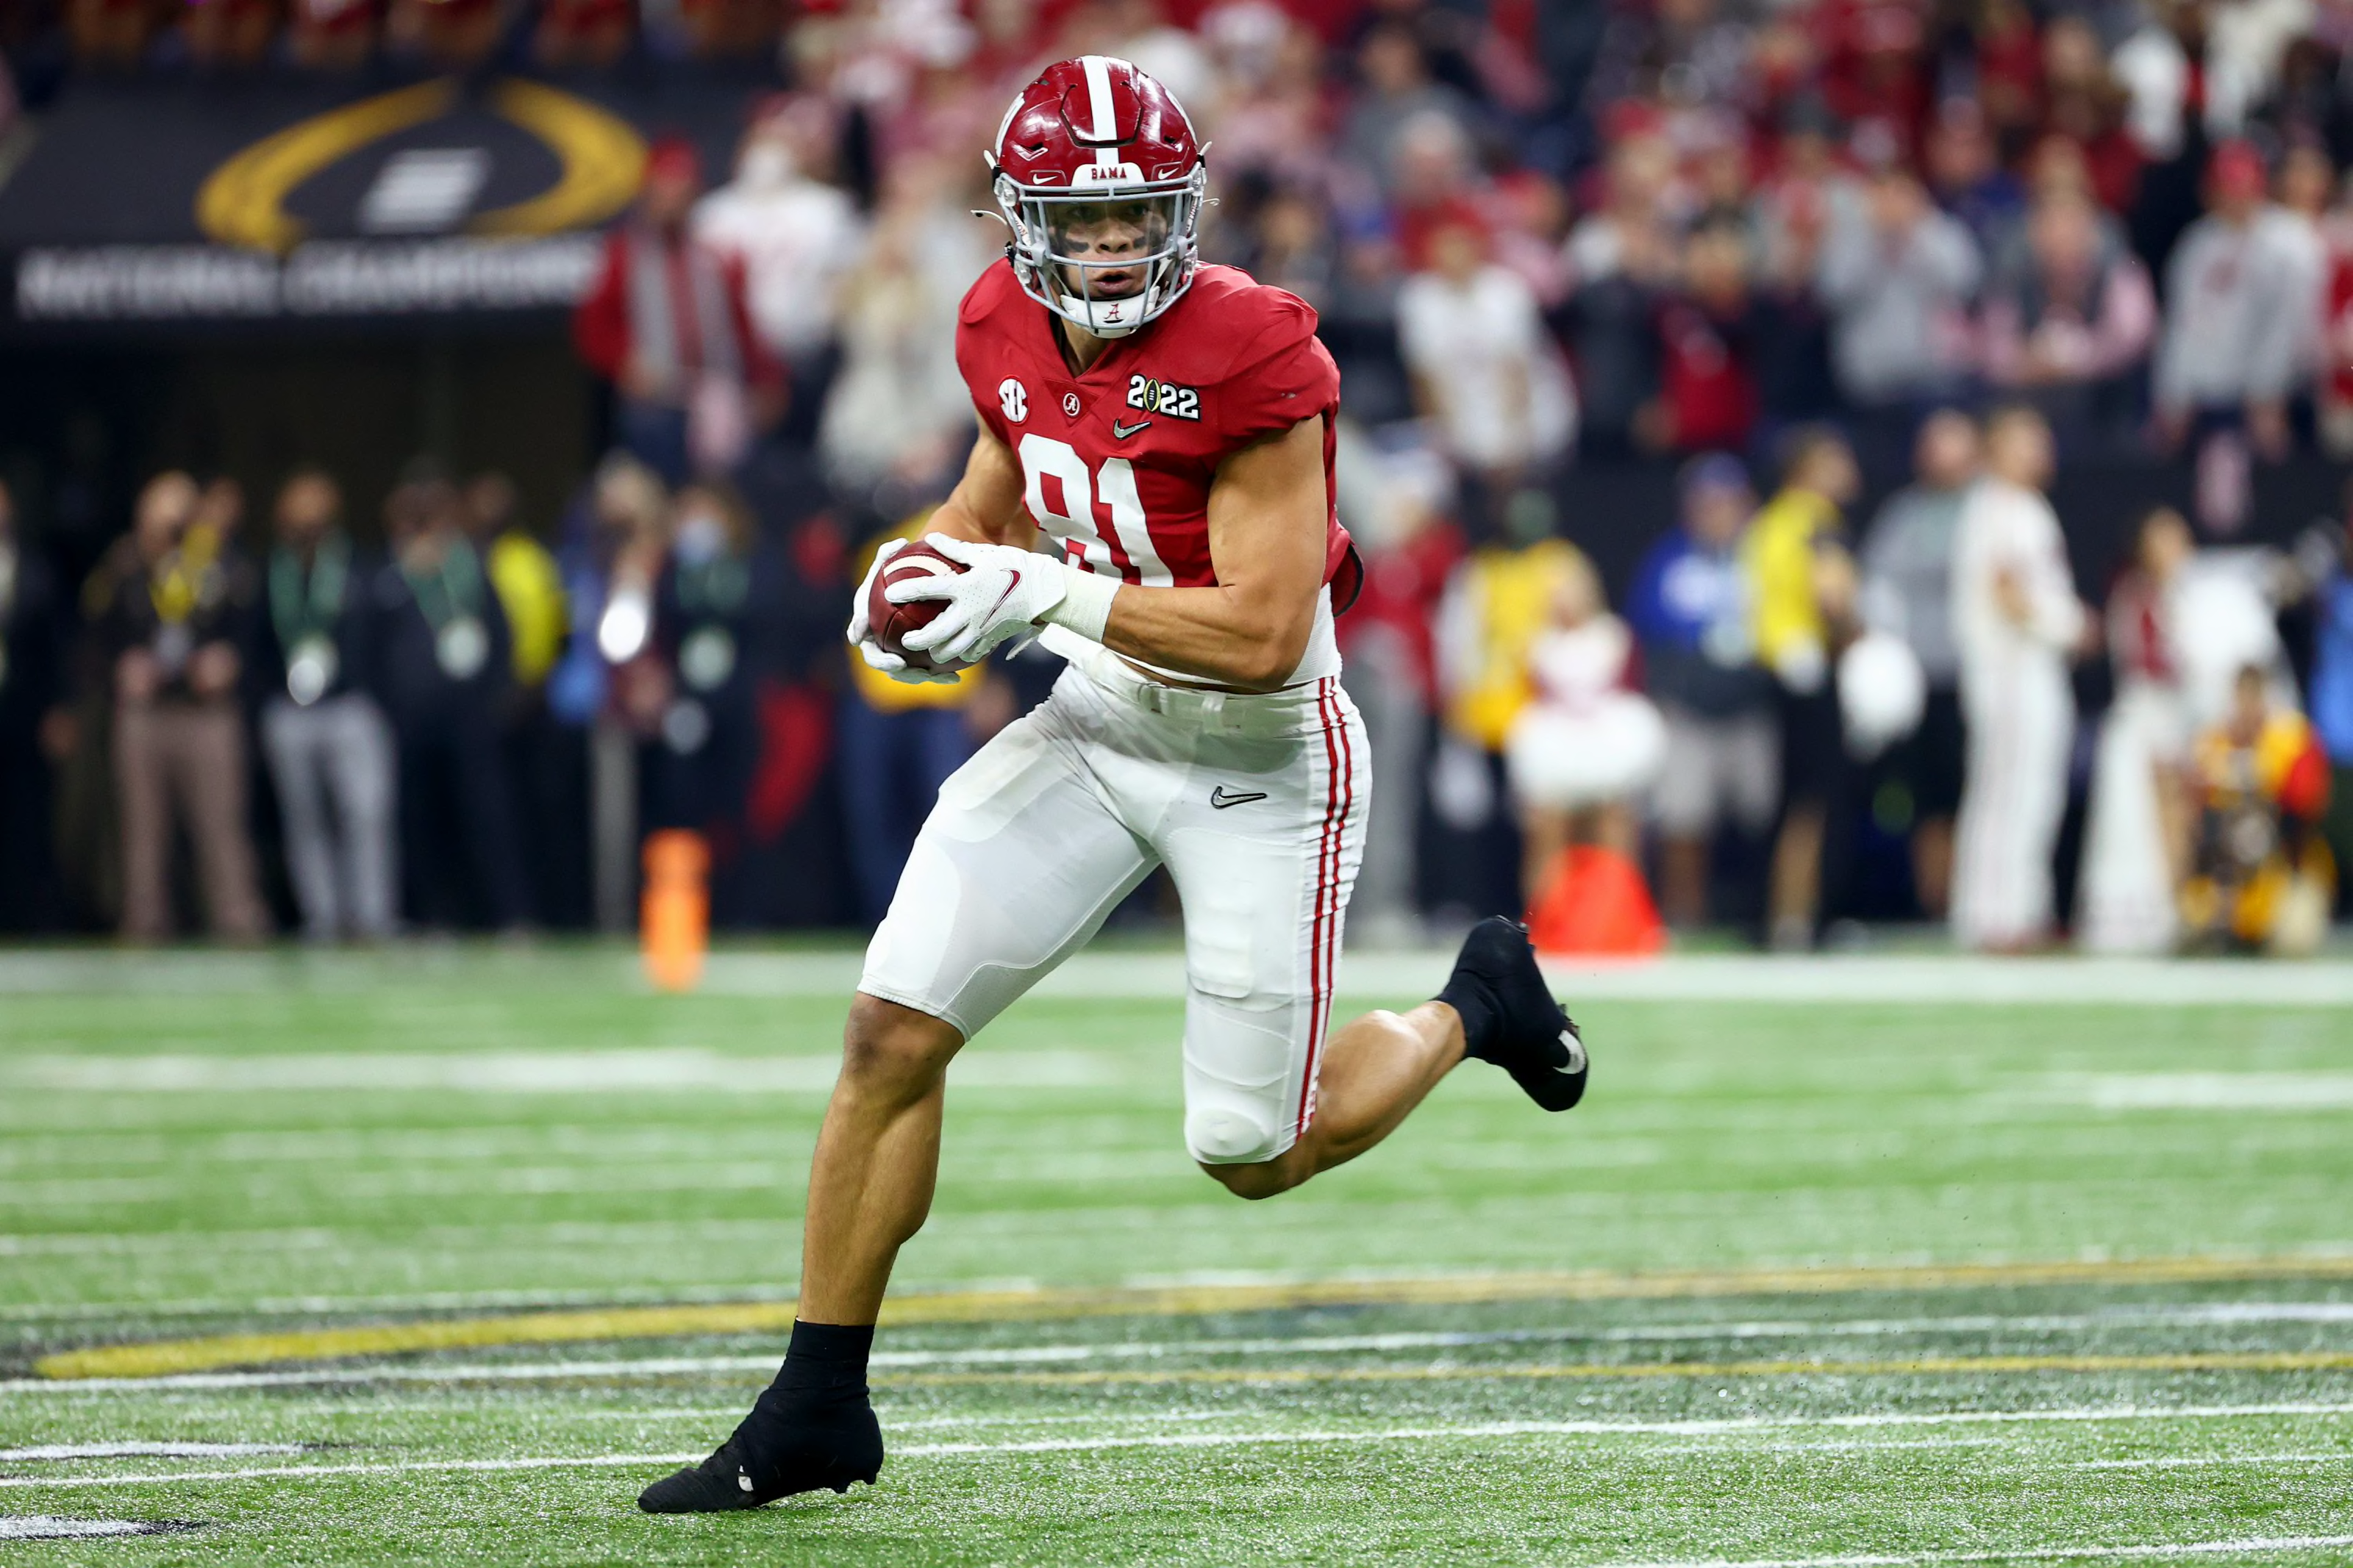 Alabama Football Projected starting lineup & depth chart for 2022